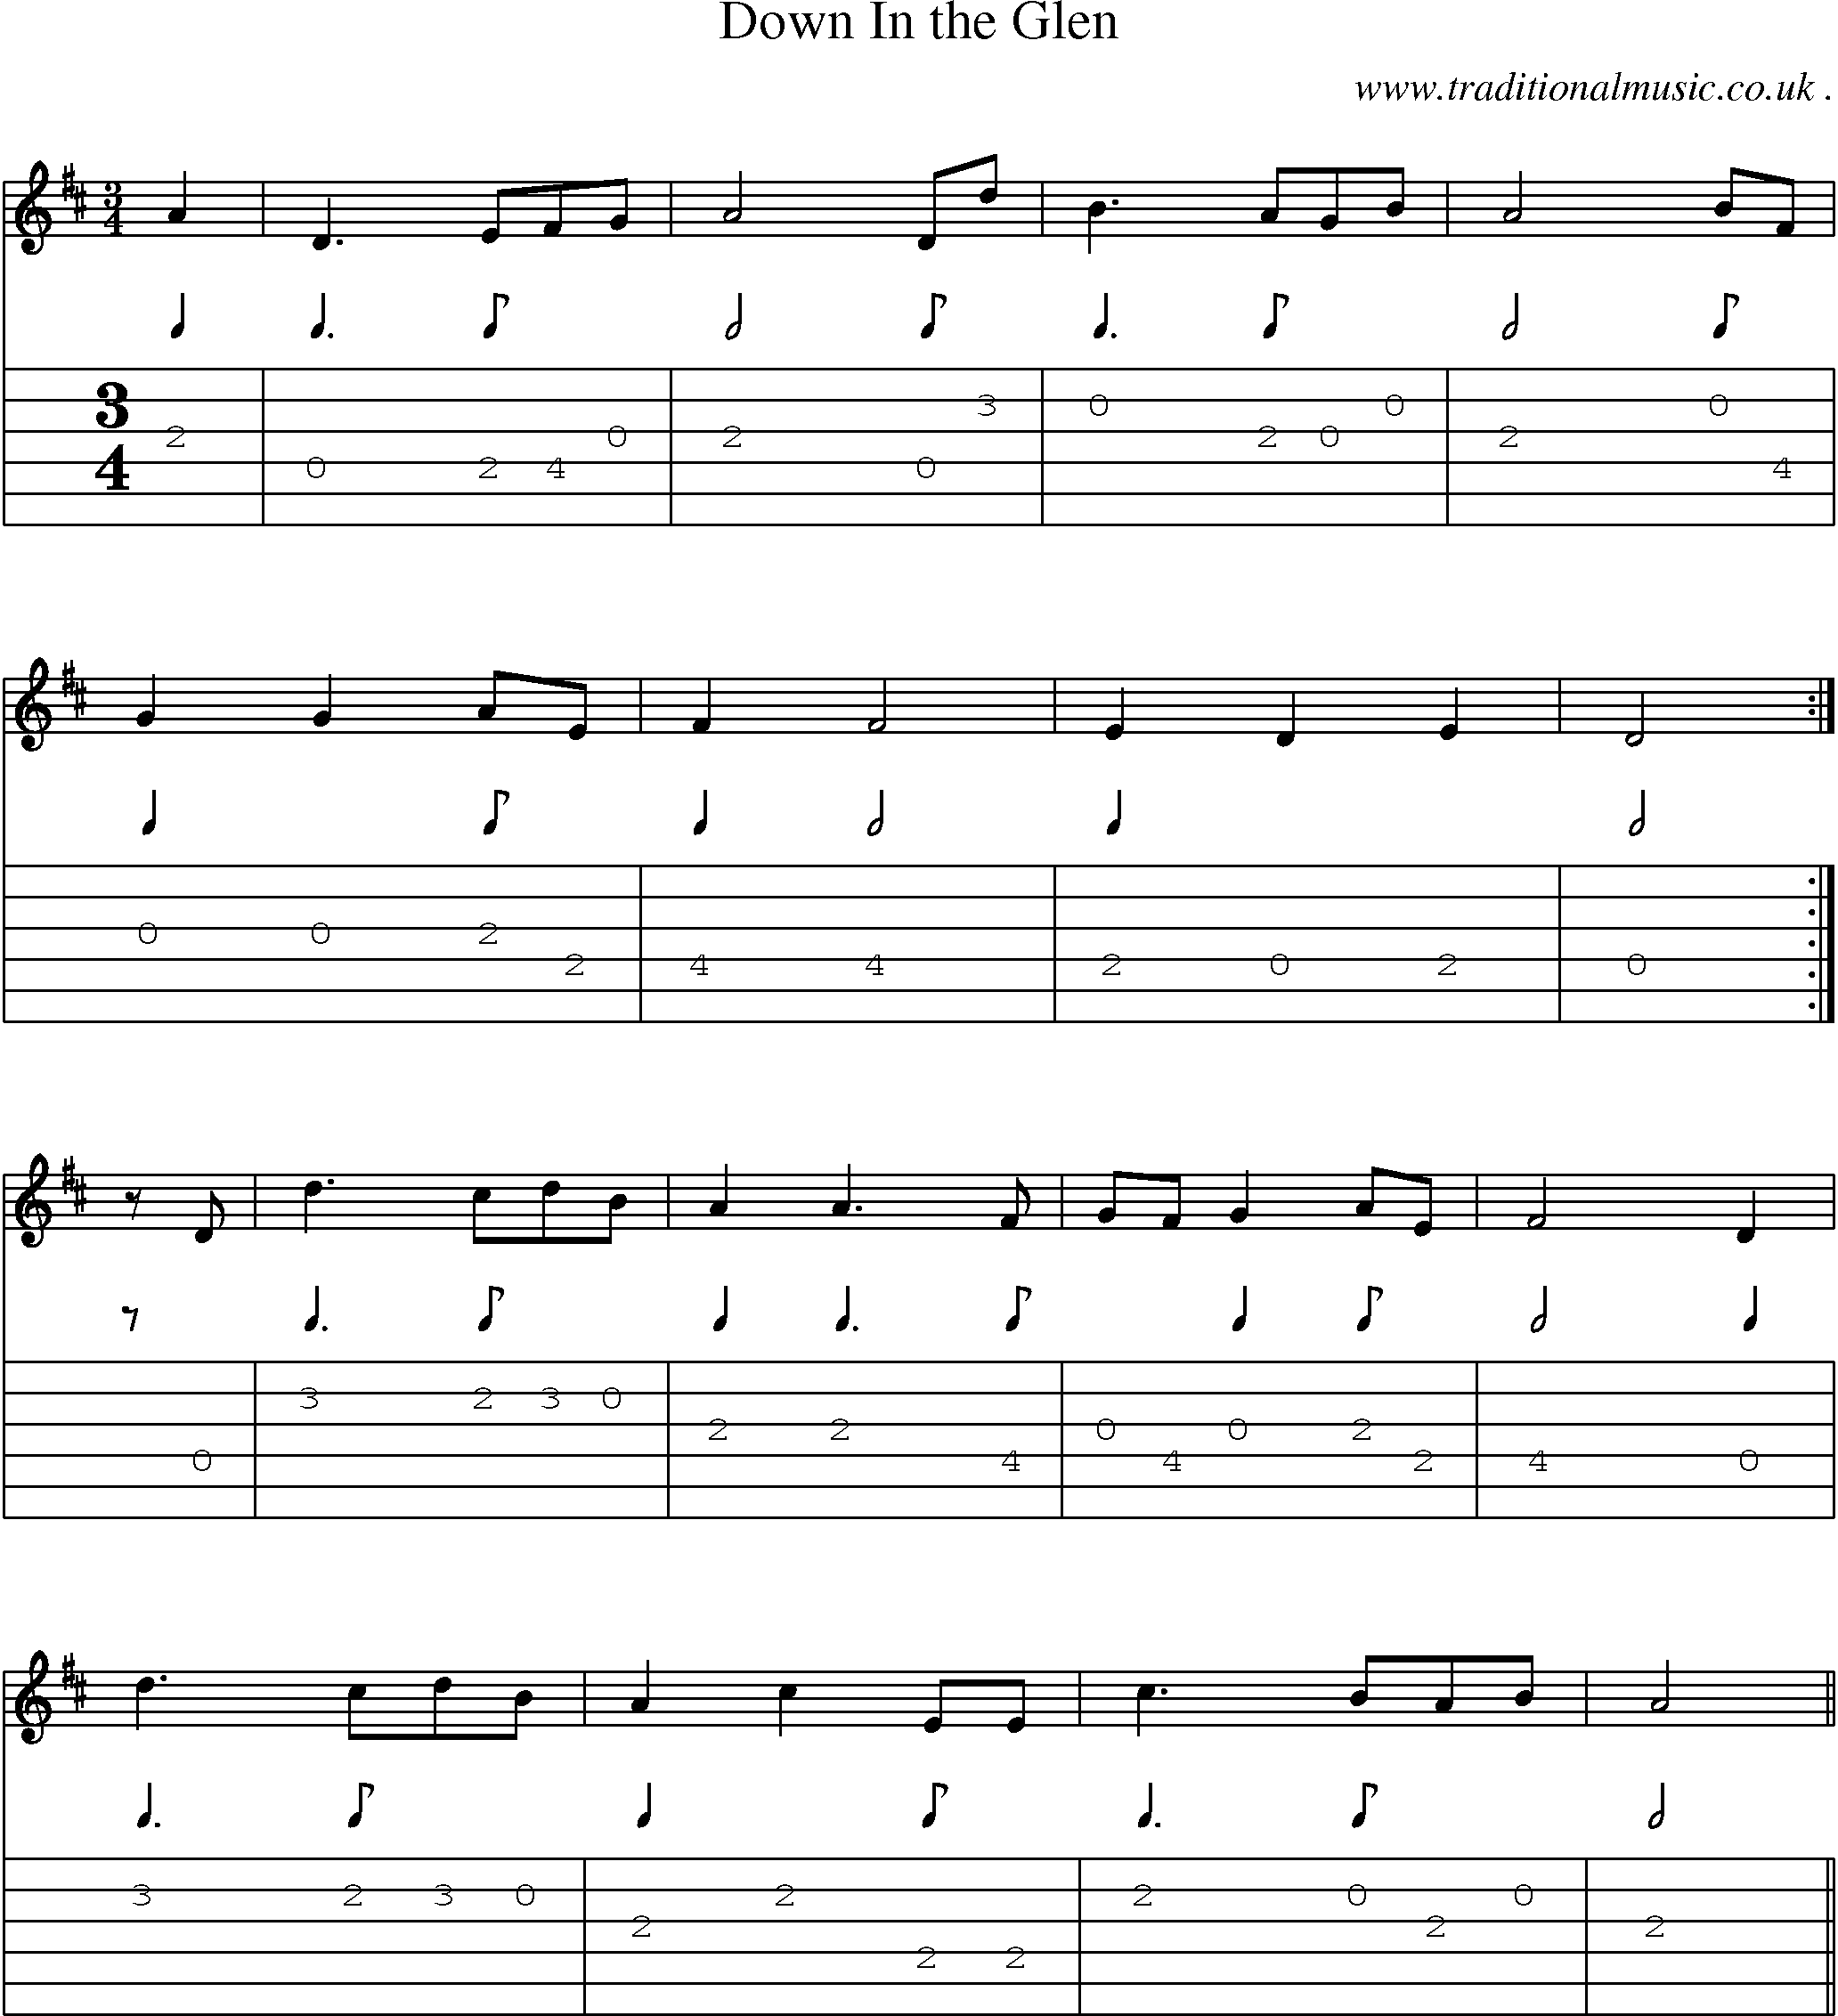 Sheet-music  score, Chords and Guitar Tabs for Down In The Glen